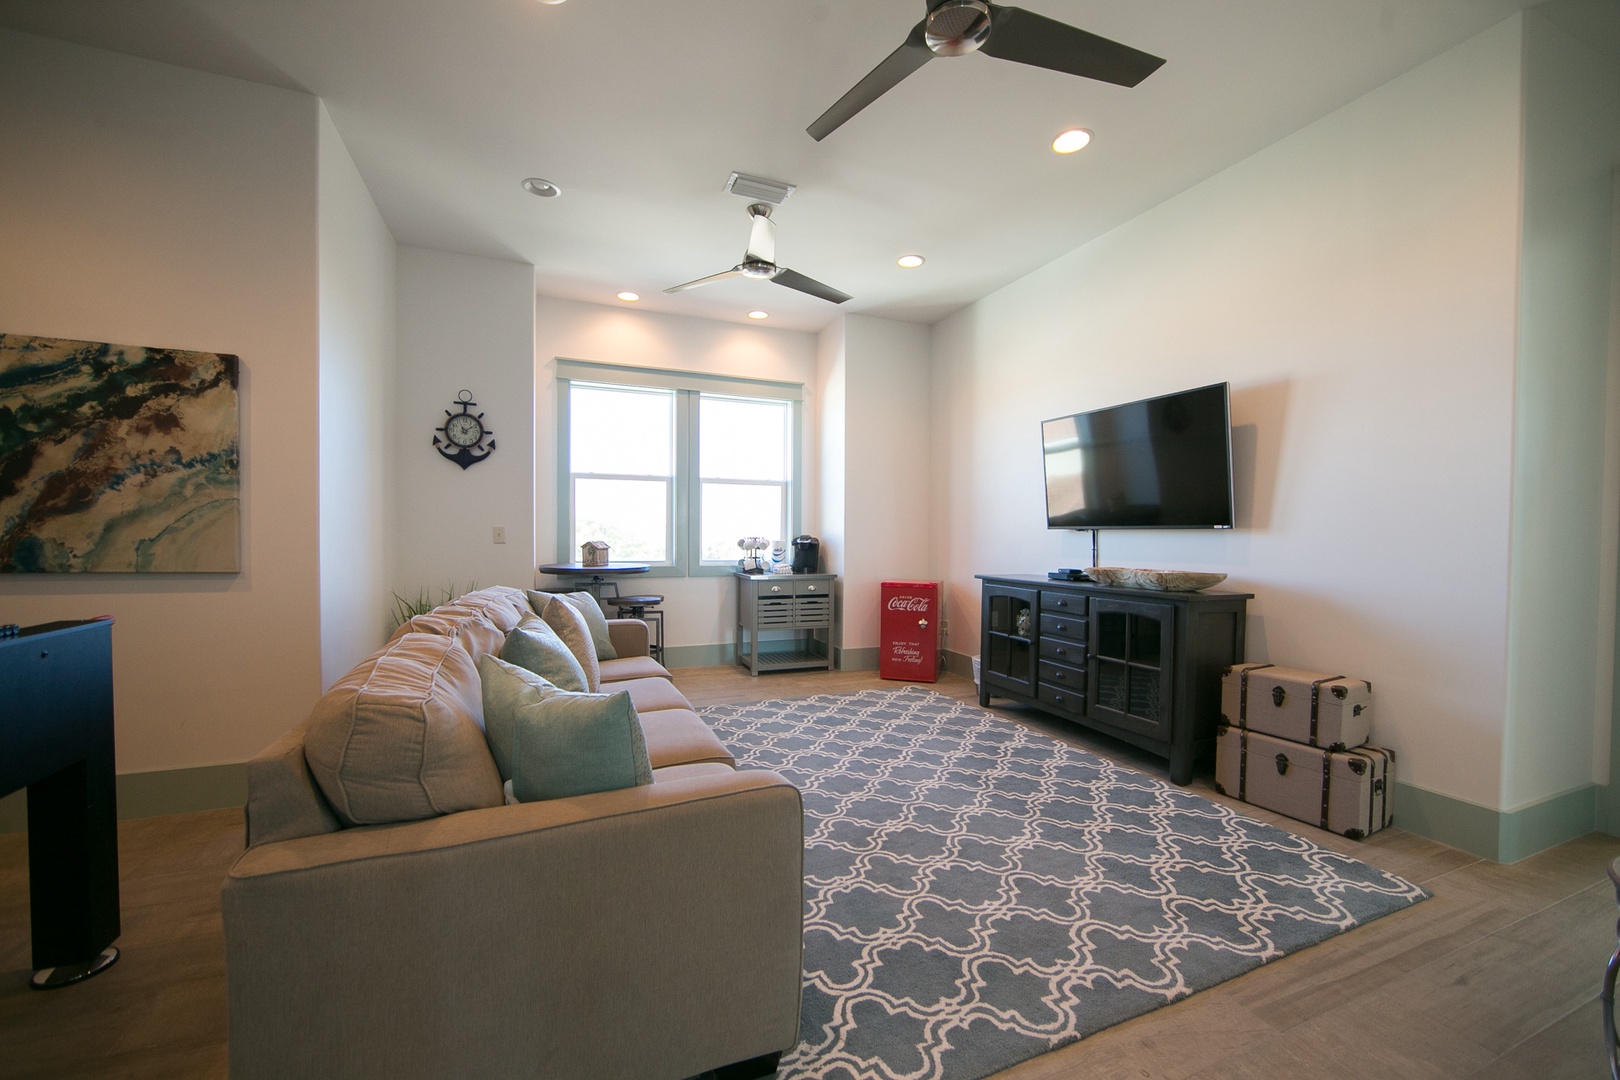 The third floor family room offers additional space to relax!